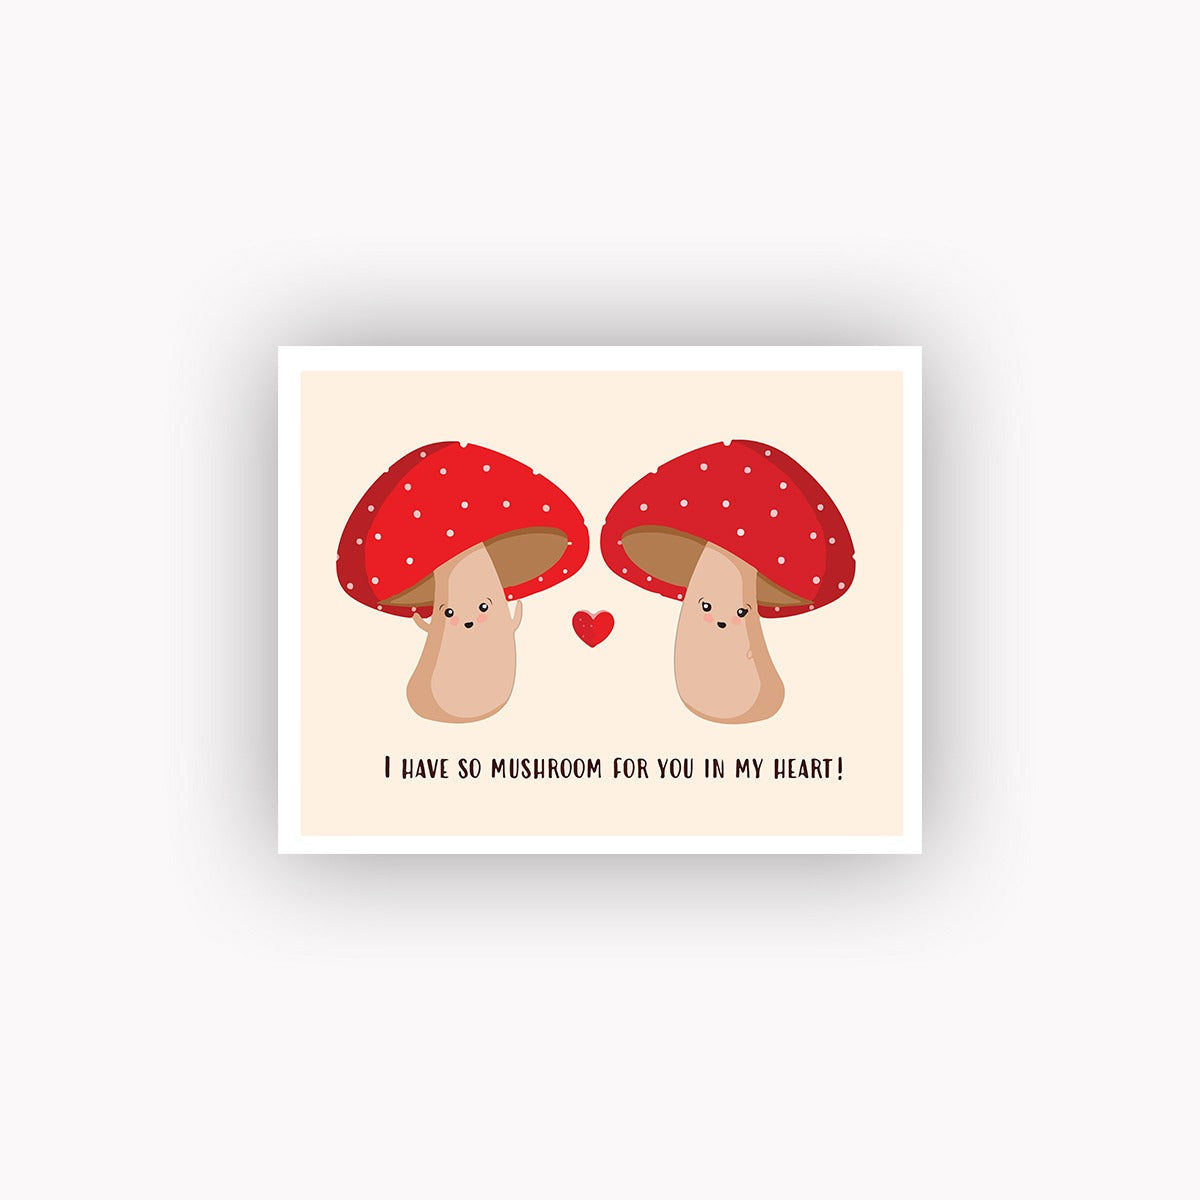 I Have mushroom for you in my heart